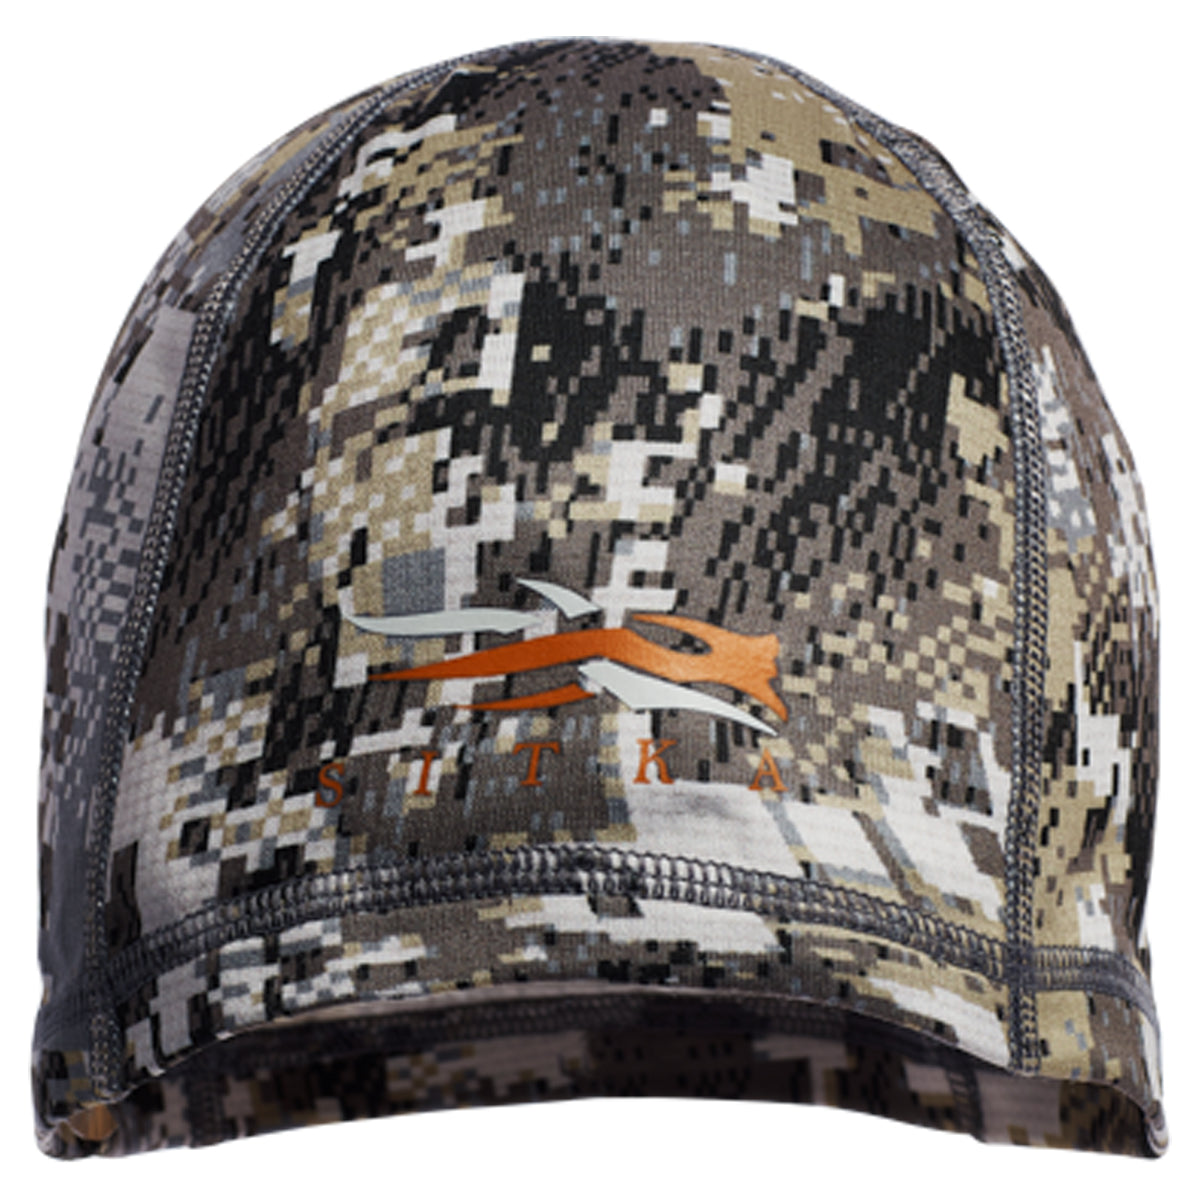 Sitka Traverse Beanie in  by GOHUNT | Sitka - GOHUNT Shop